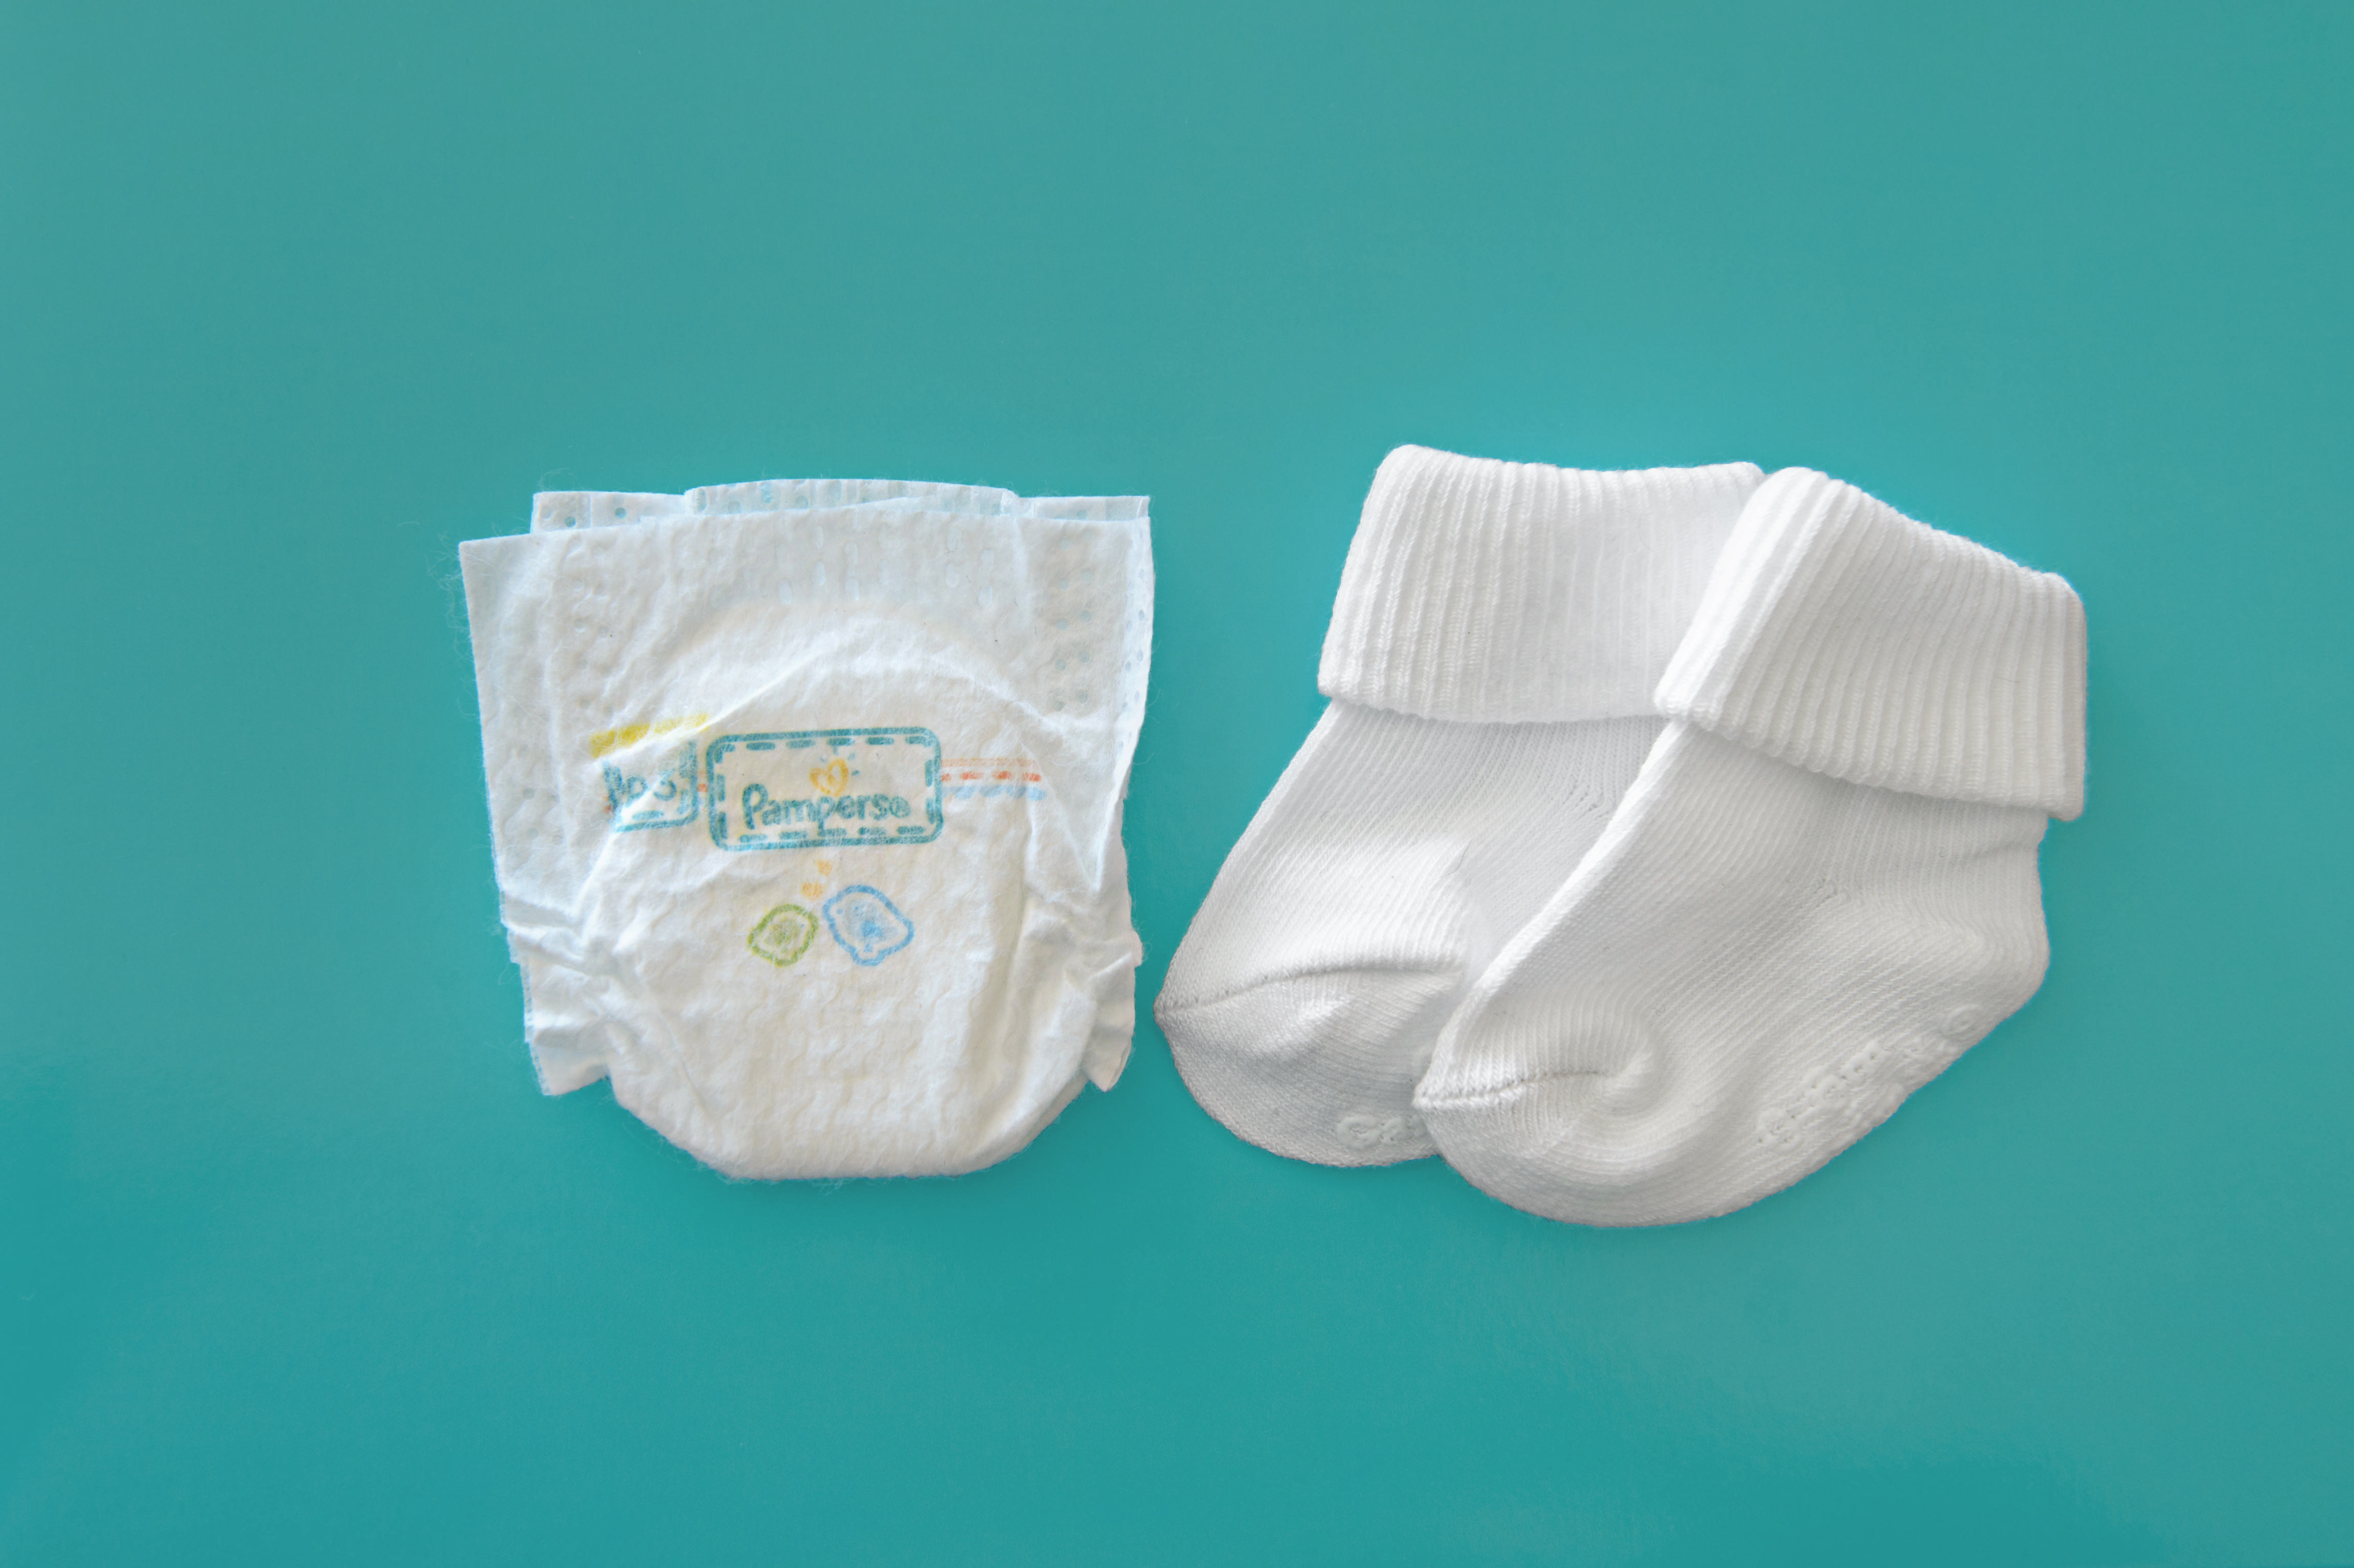 pampers for premature babies